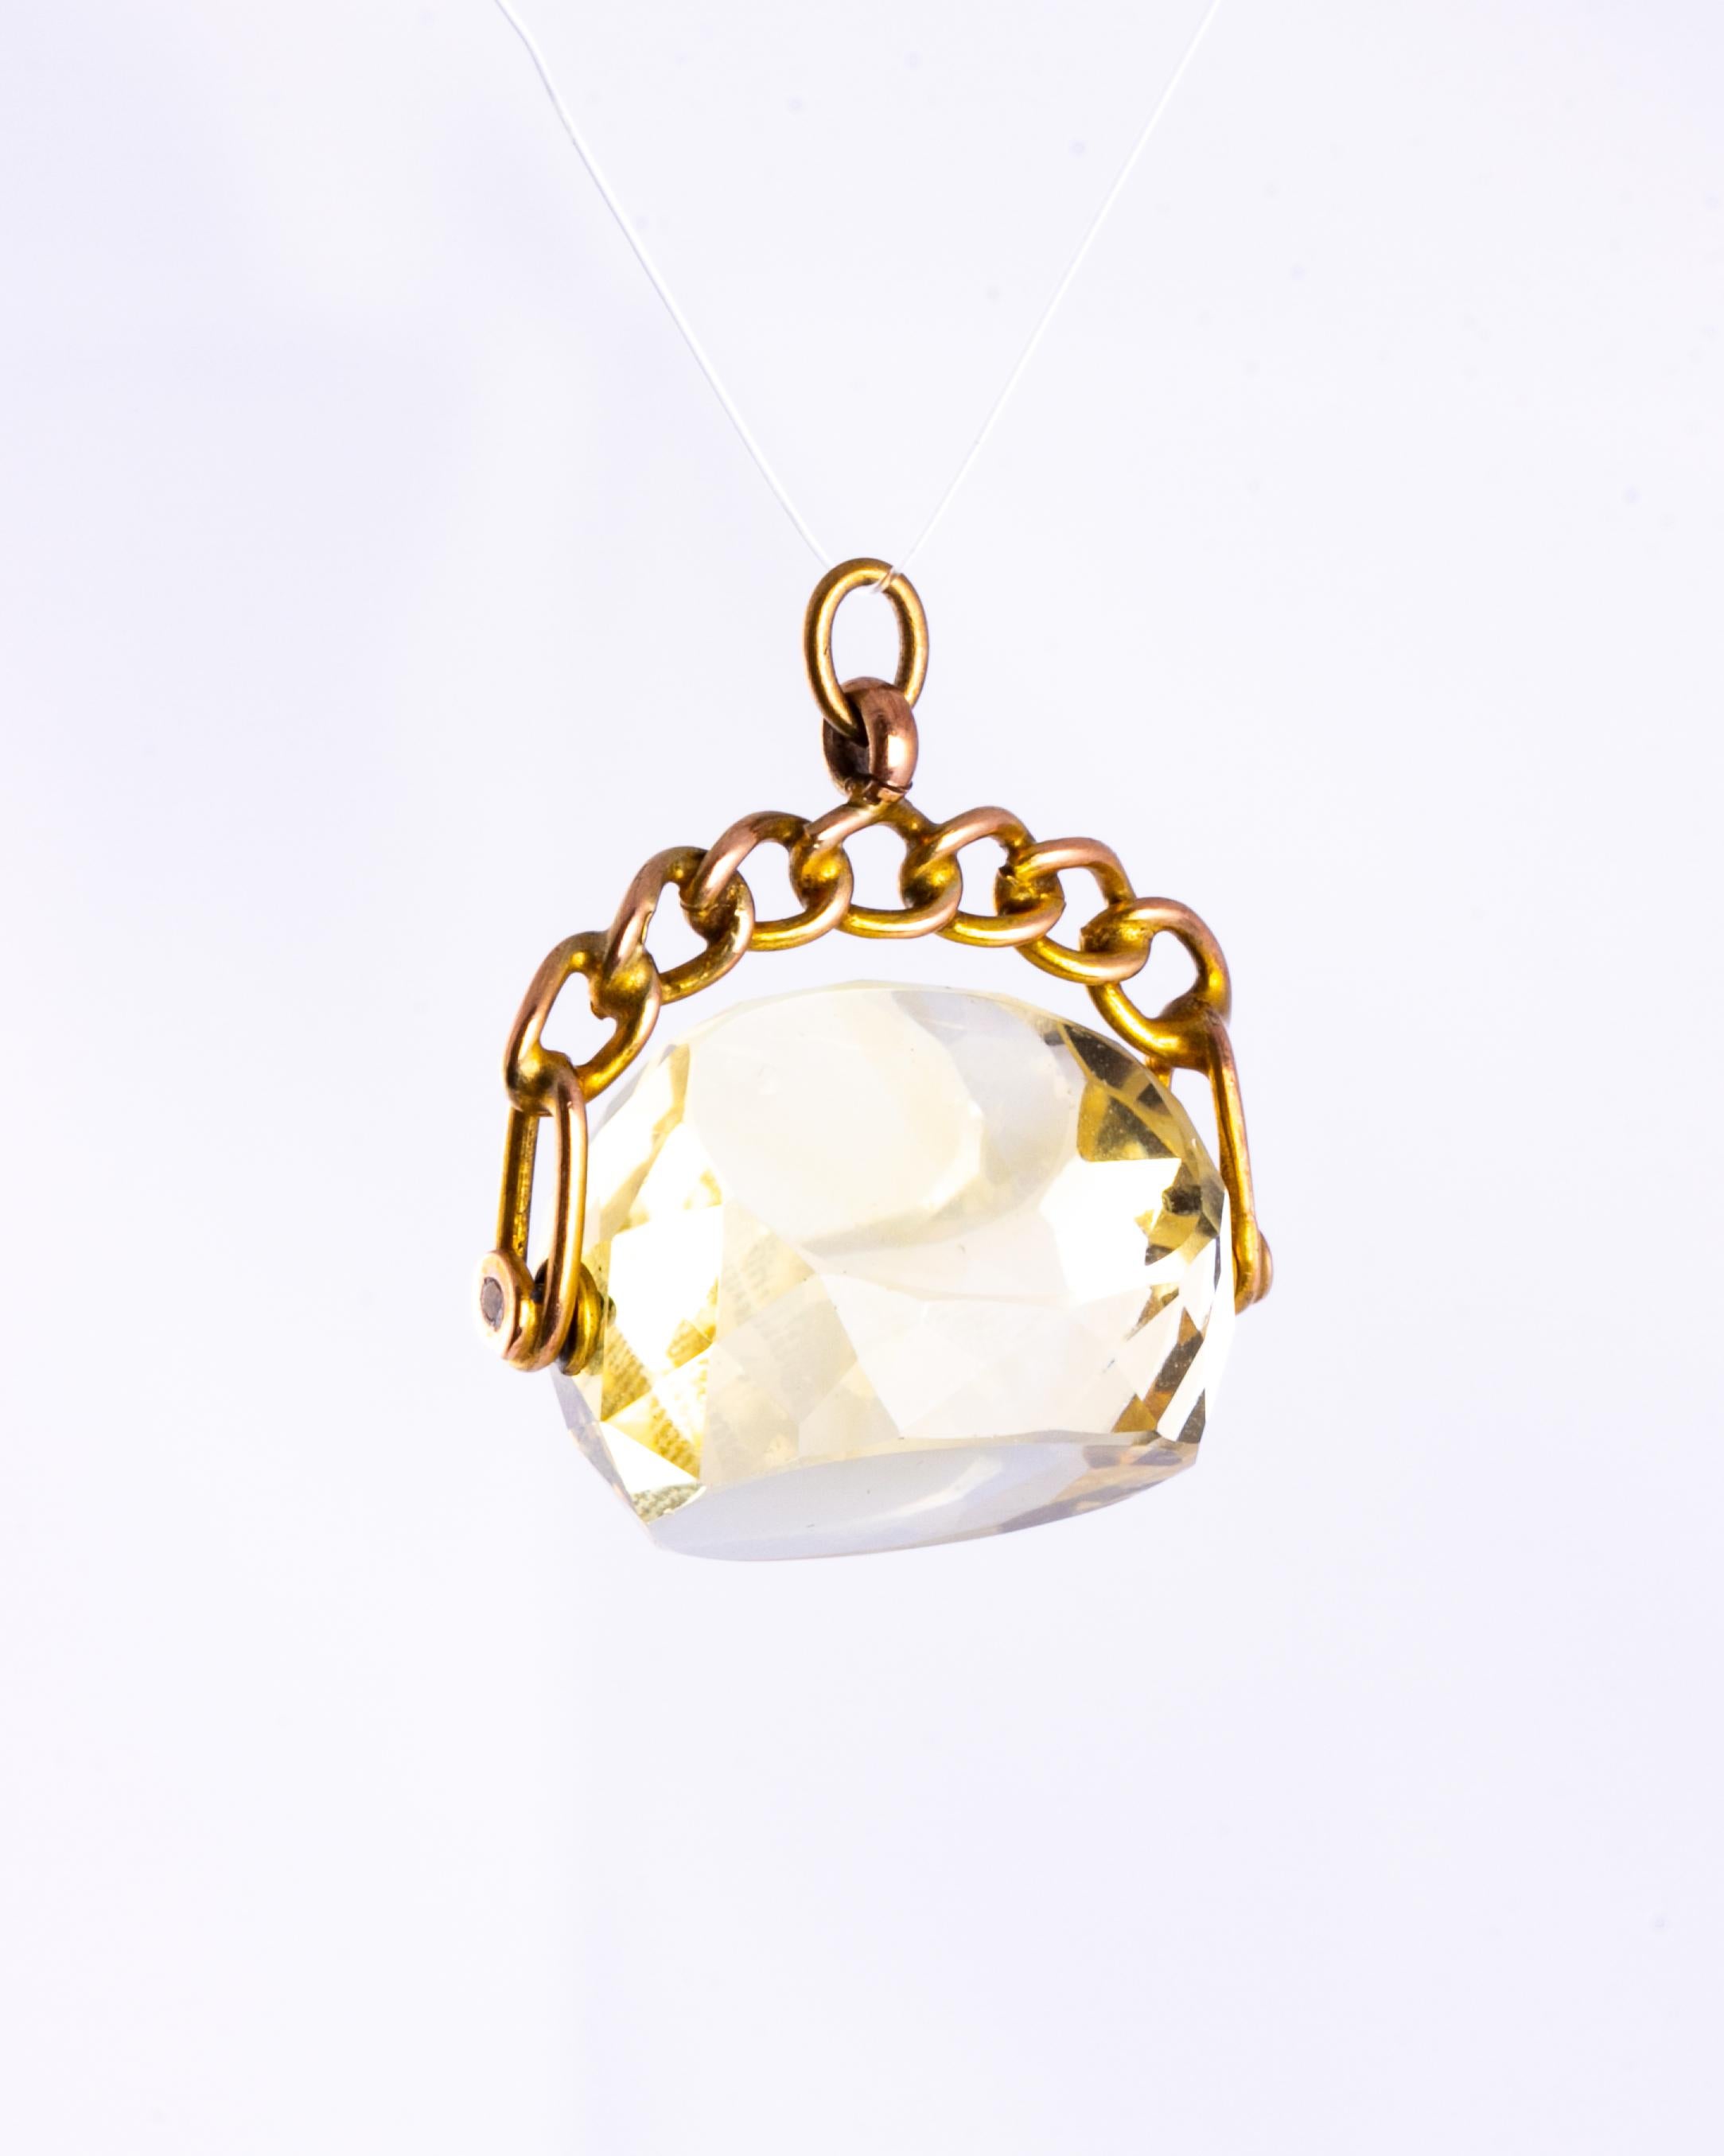 This gorgeous swivel fob holds a yellow citrine stone and the frame and loop is modelled out of 9ct gold and has chain detail. 

Stone Width: 18mm
Height including Loop: 28mm

Weight: 9.1g 